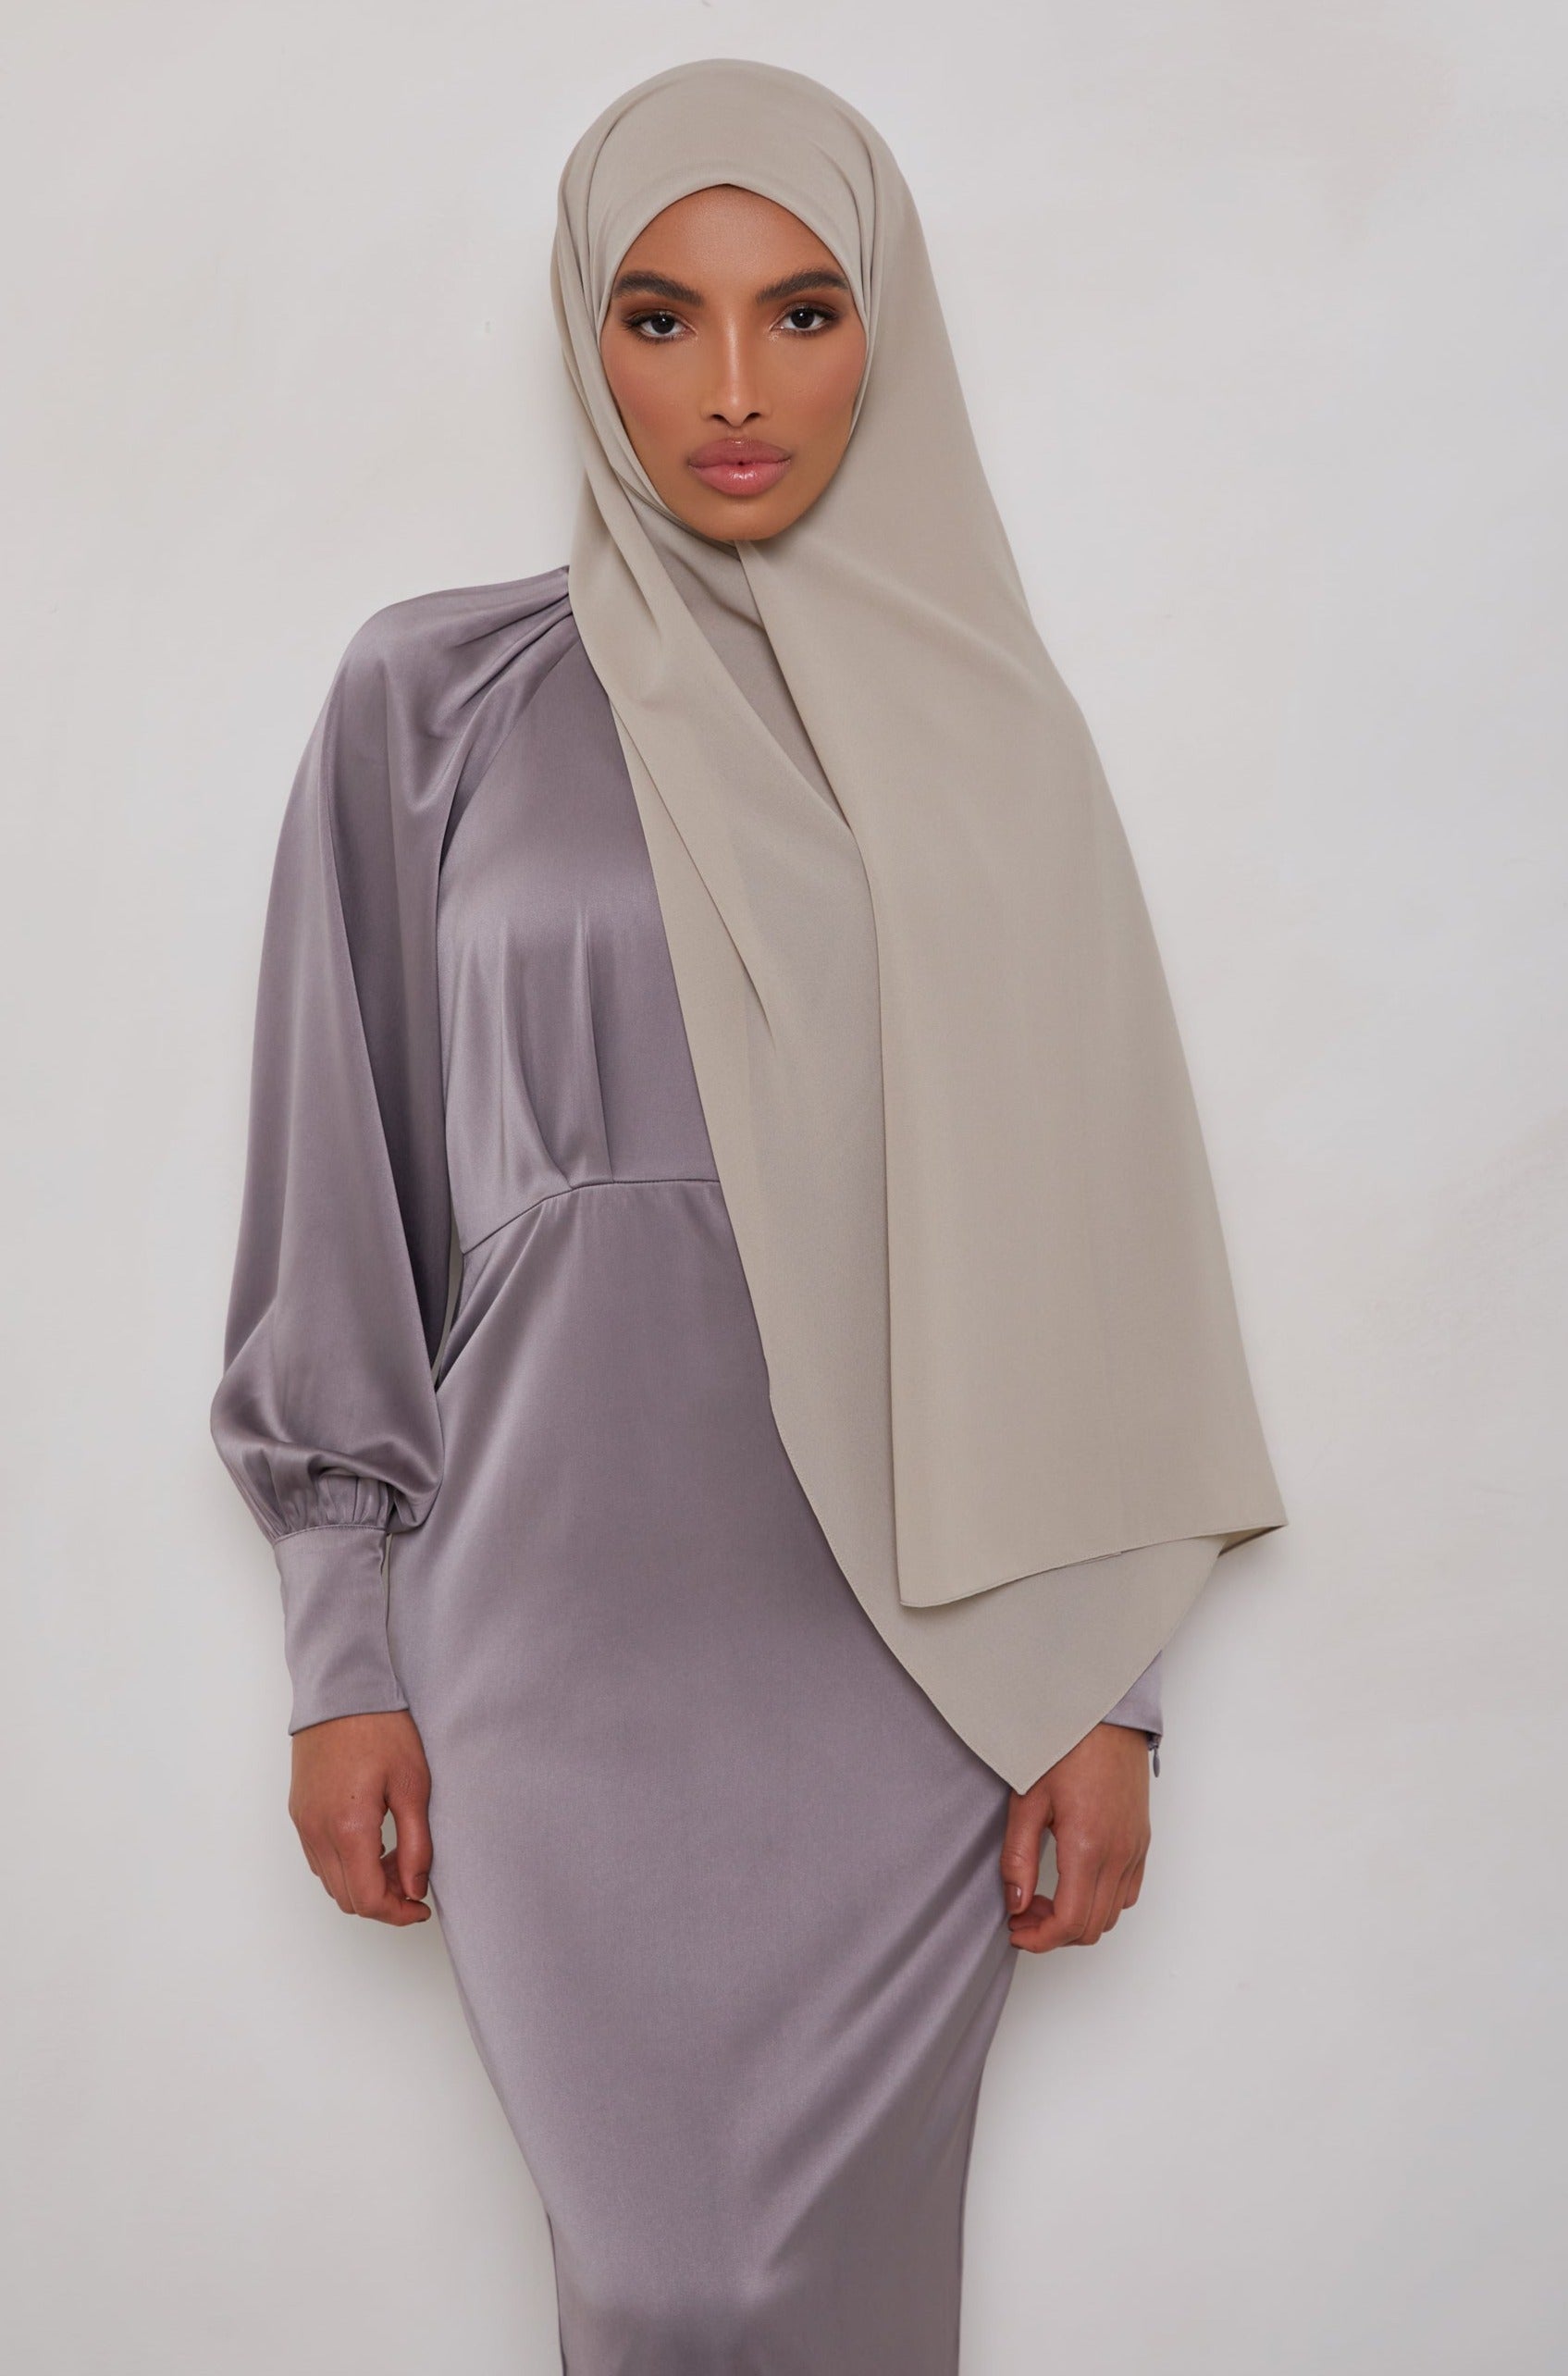 Essential Chiffon Hijab - Fossil Scarves & Shawls Veiled Collection 